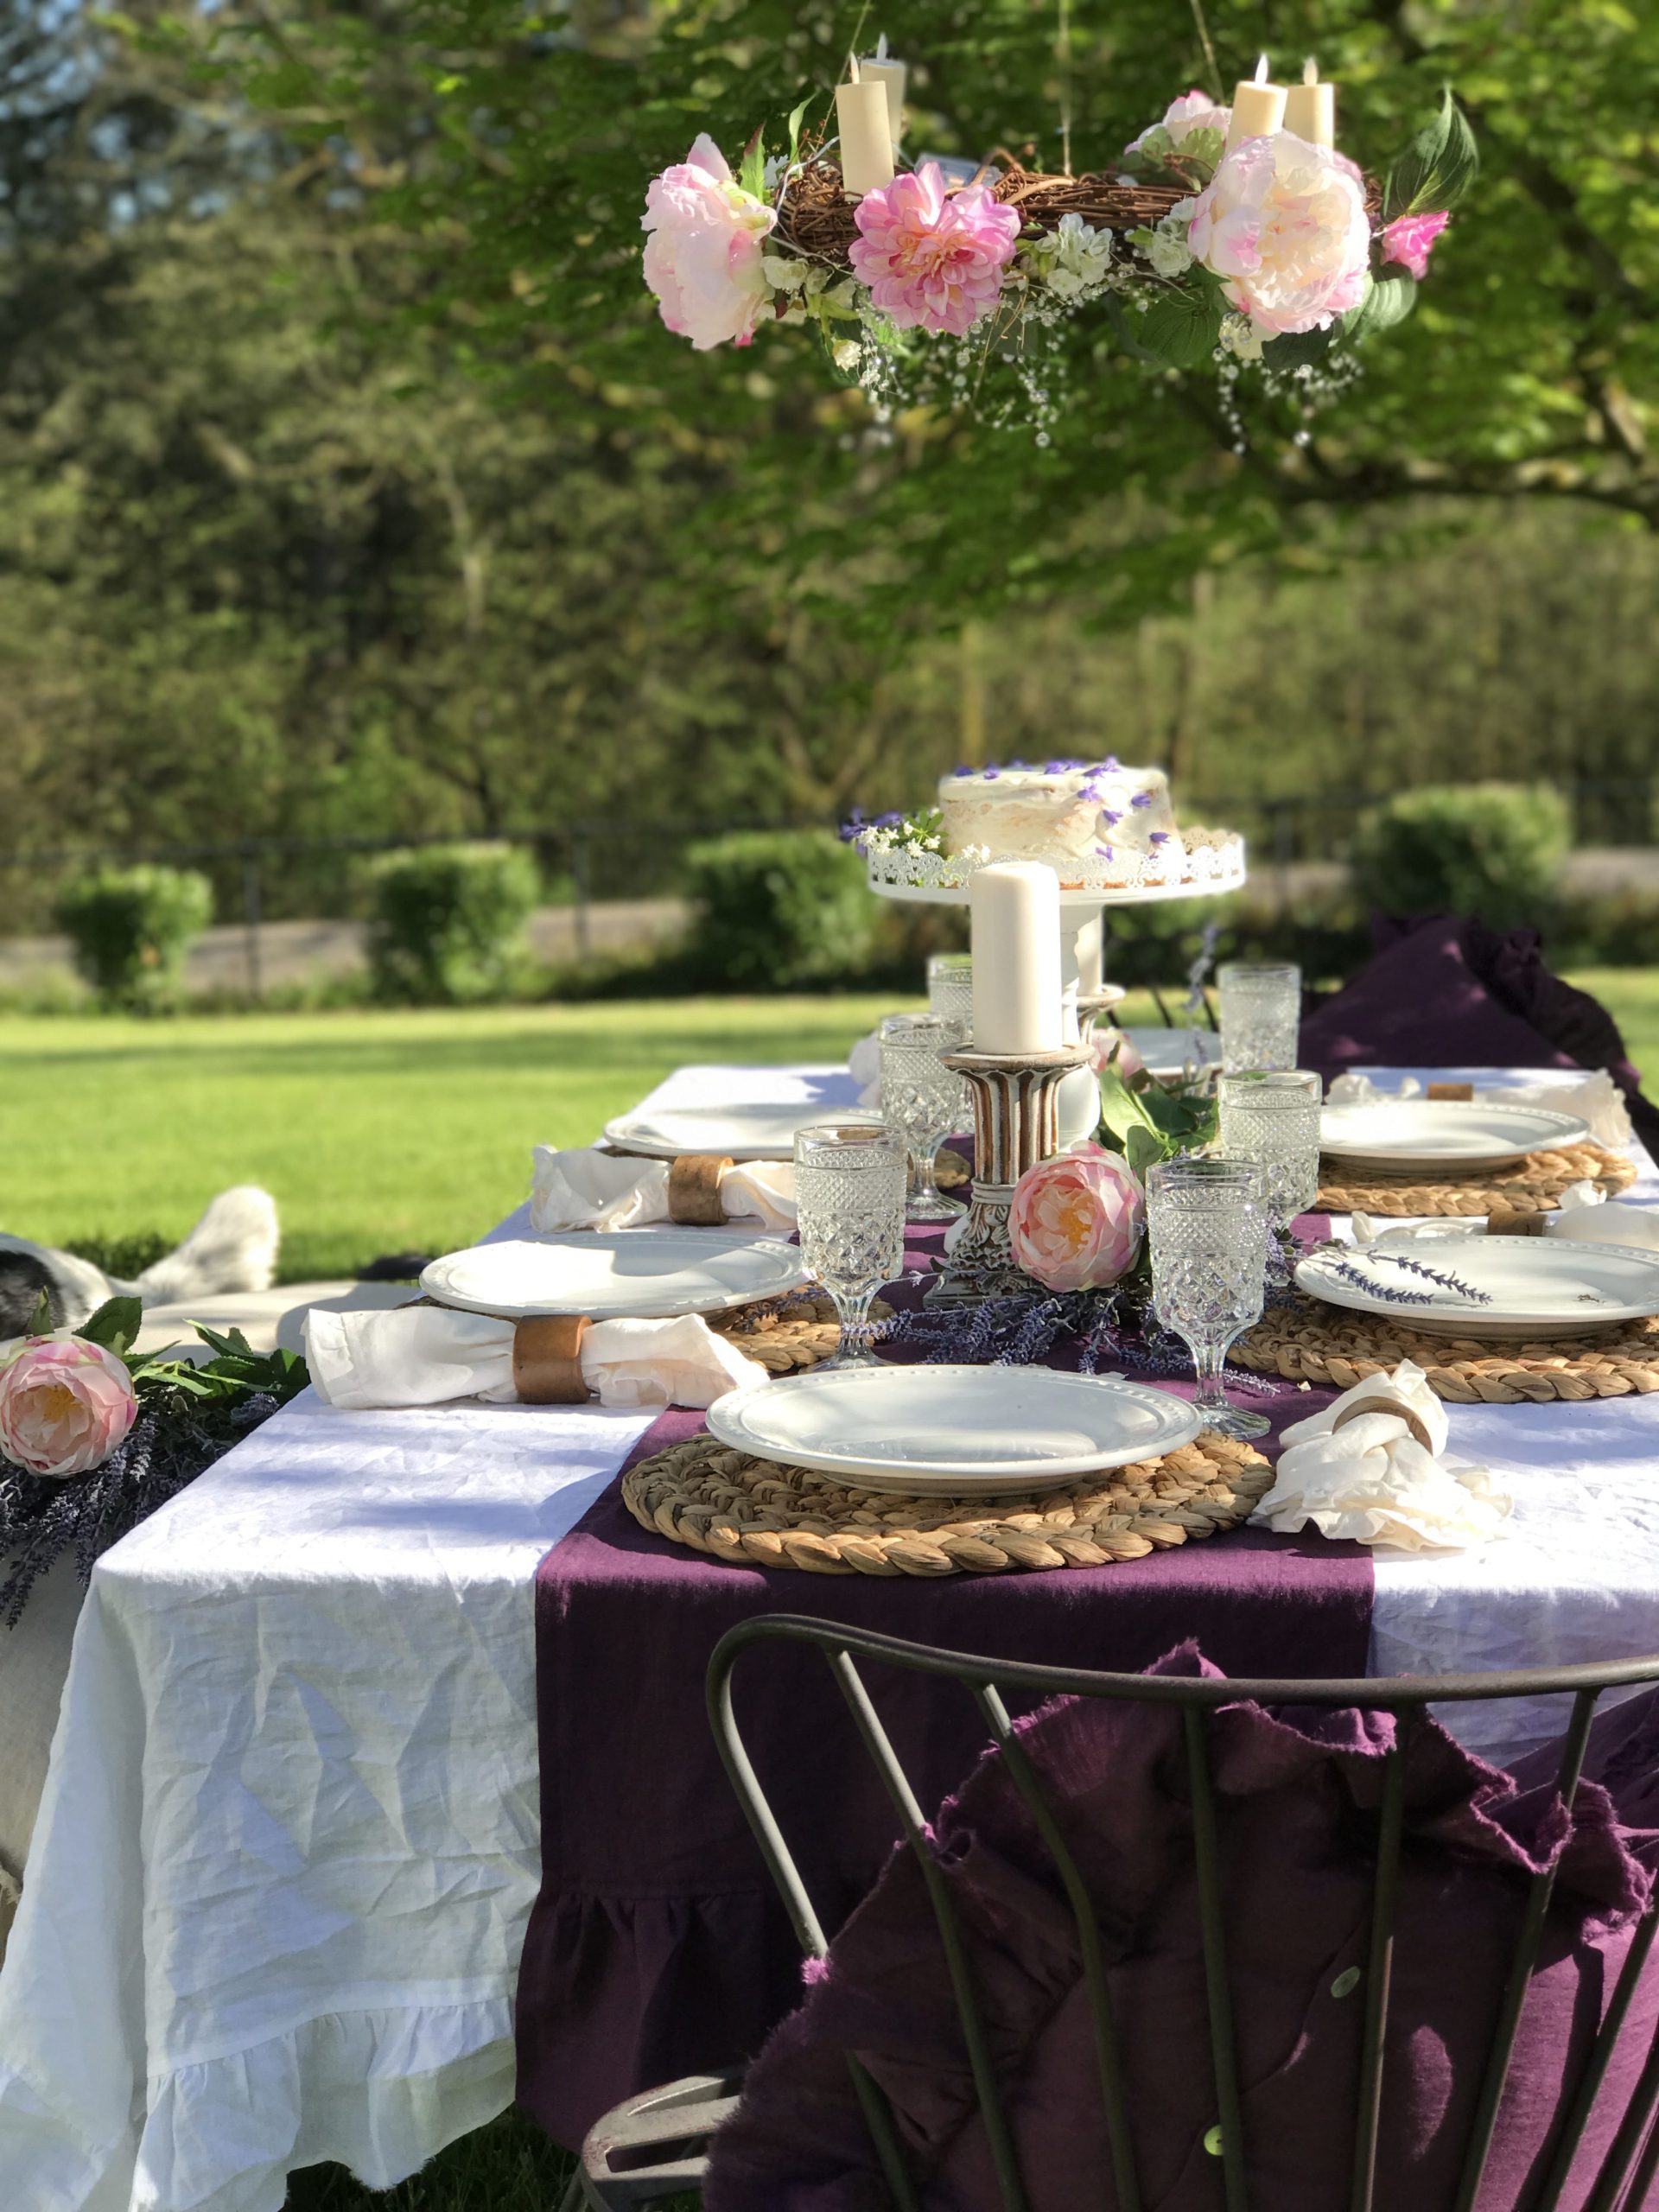 Outdoor Dining- Shabby Chic Style